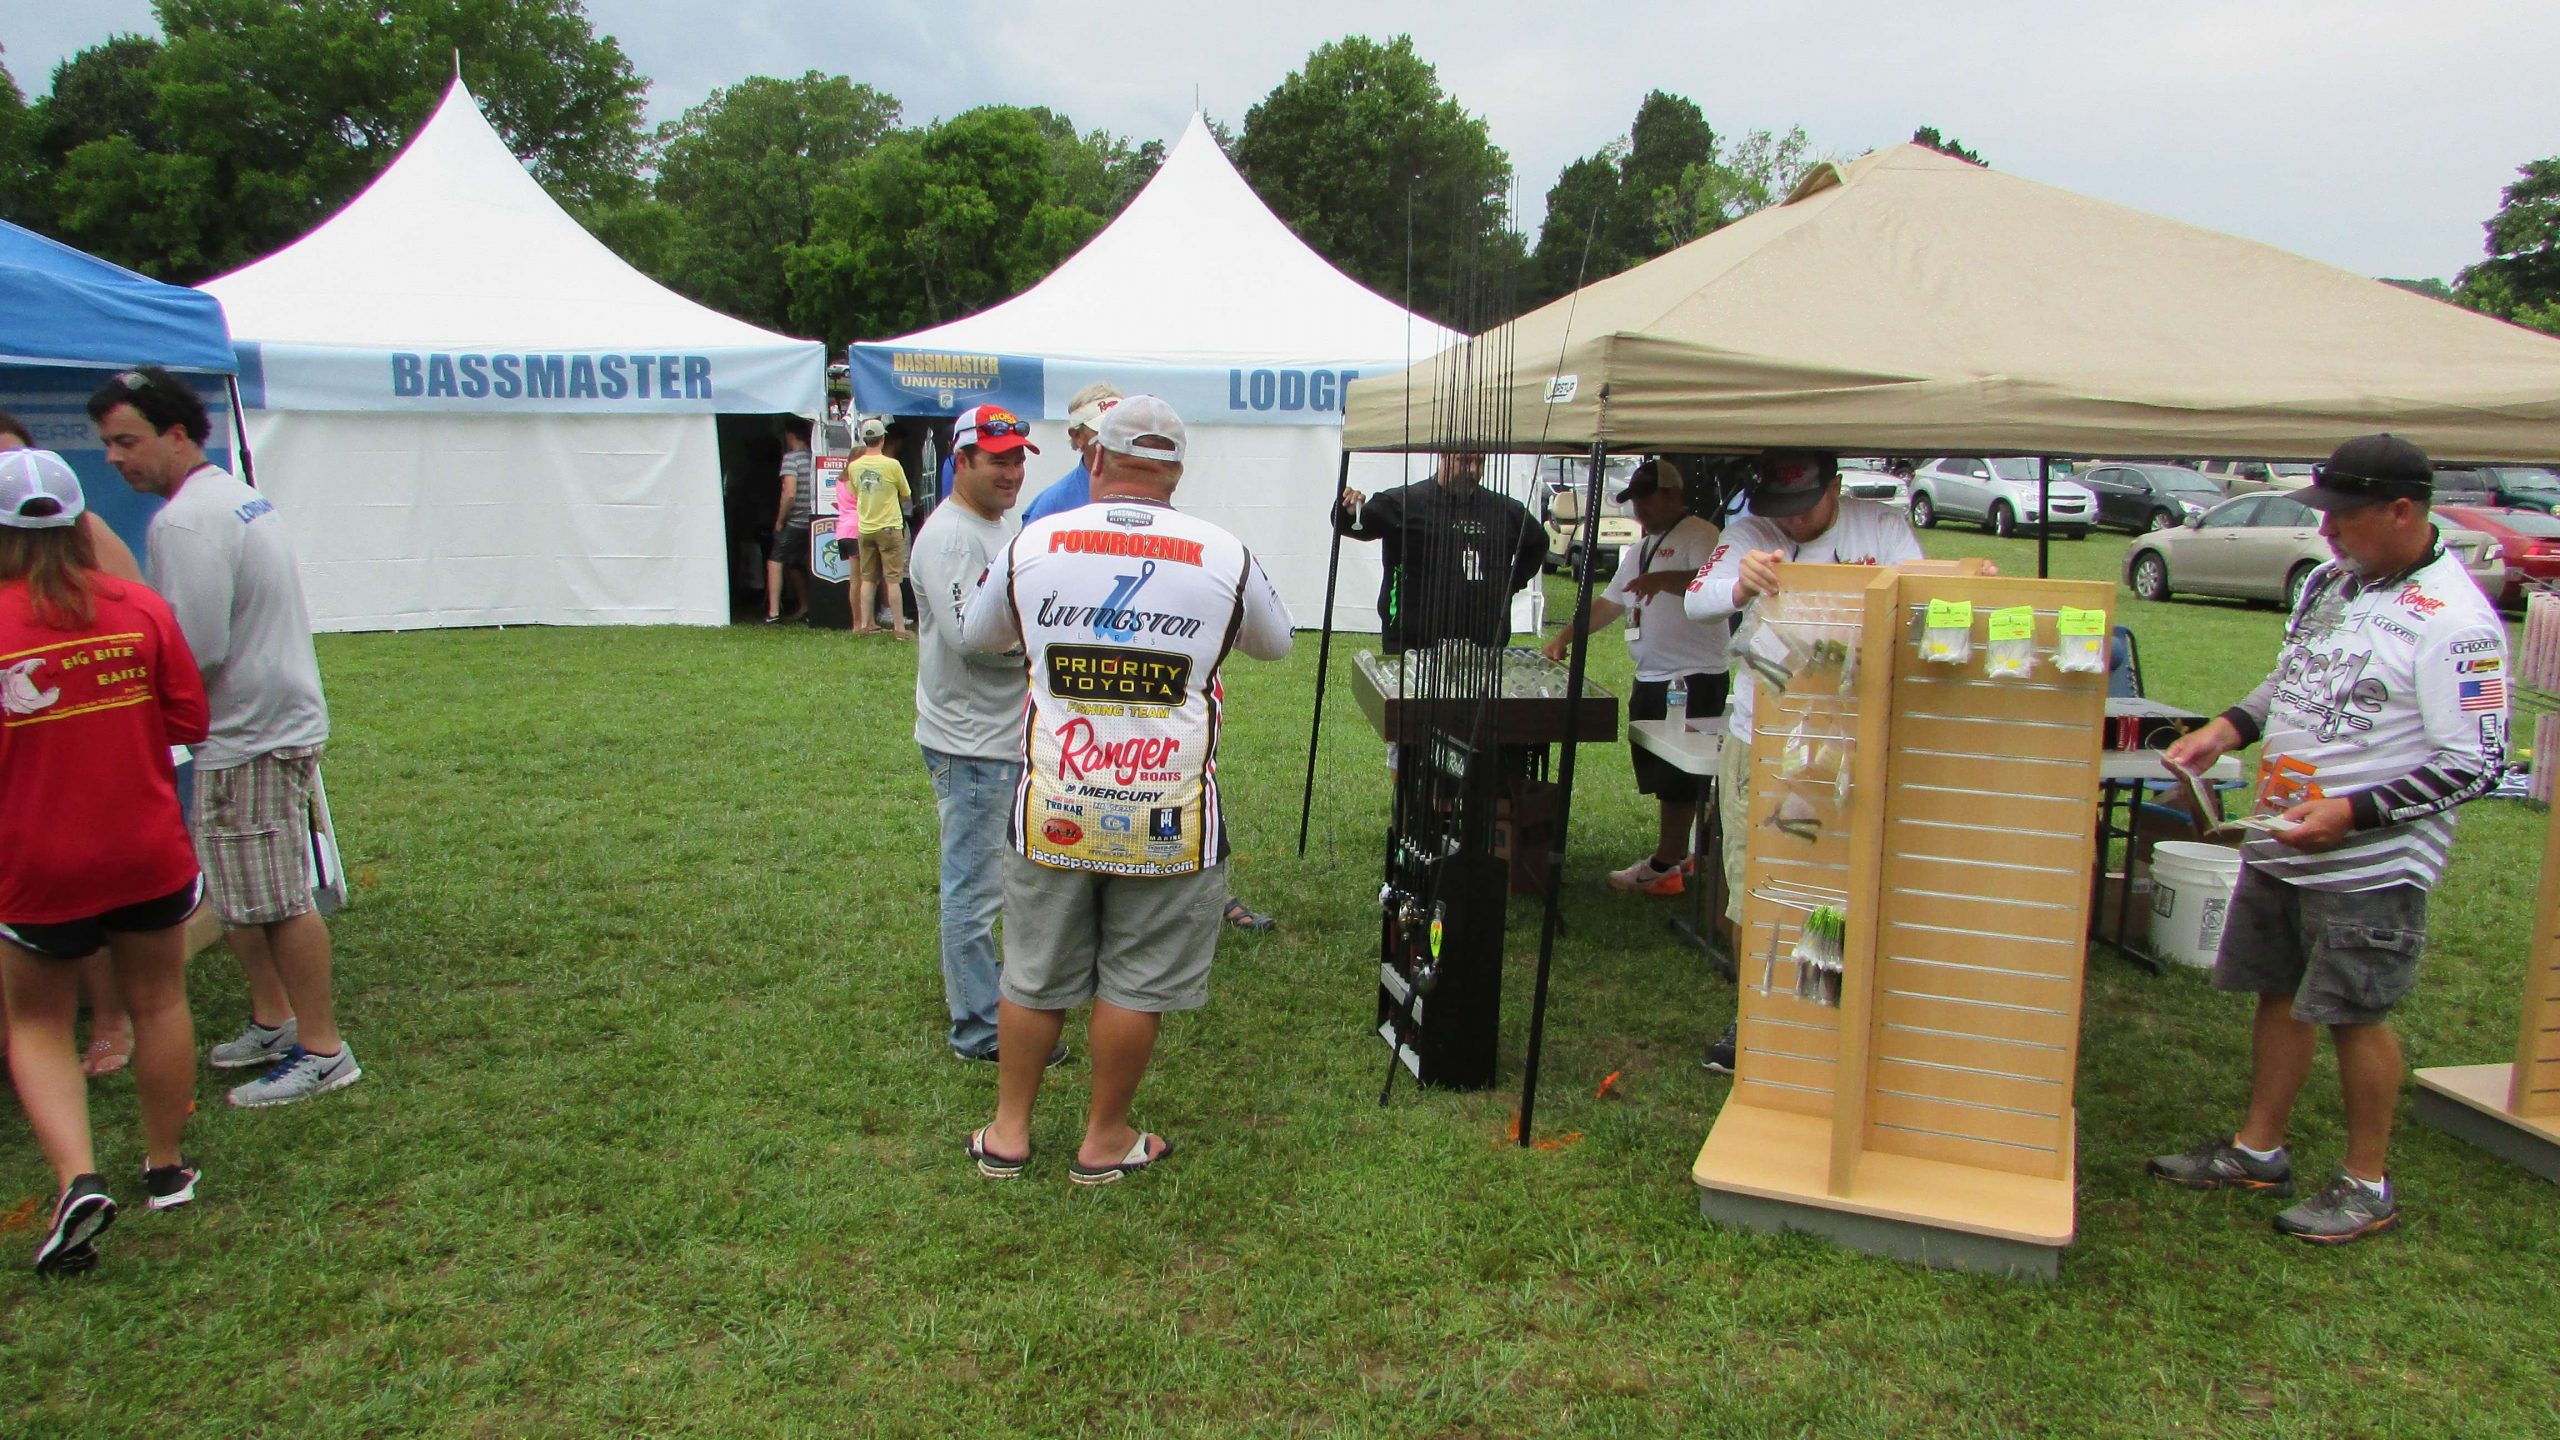 Elite anglers were mingling with the fans and their sponsors throughout the day.